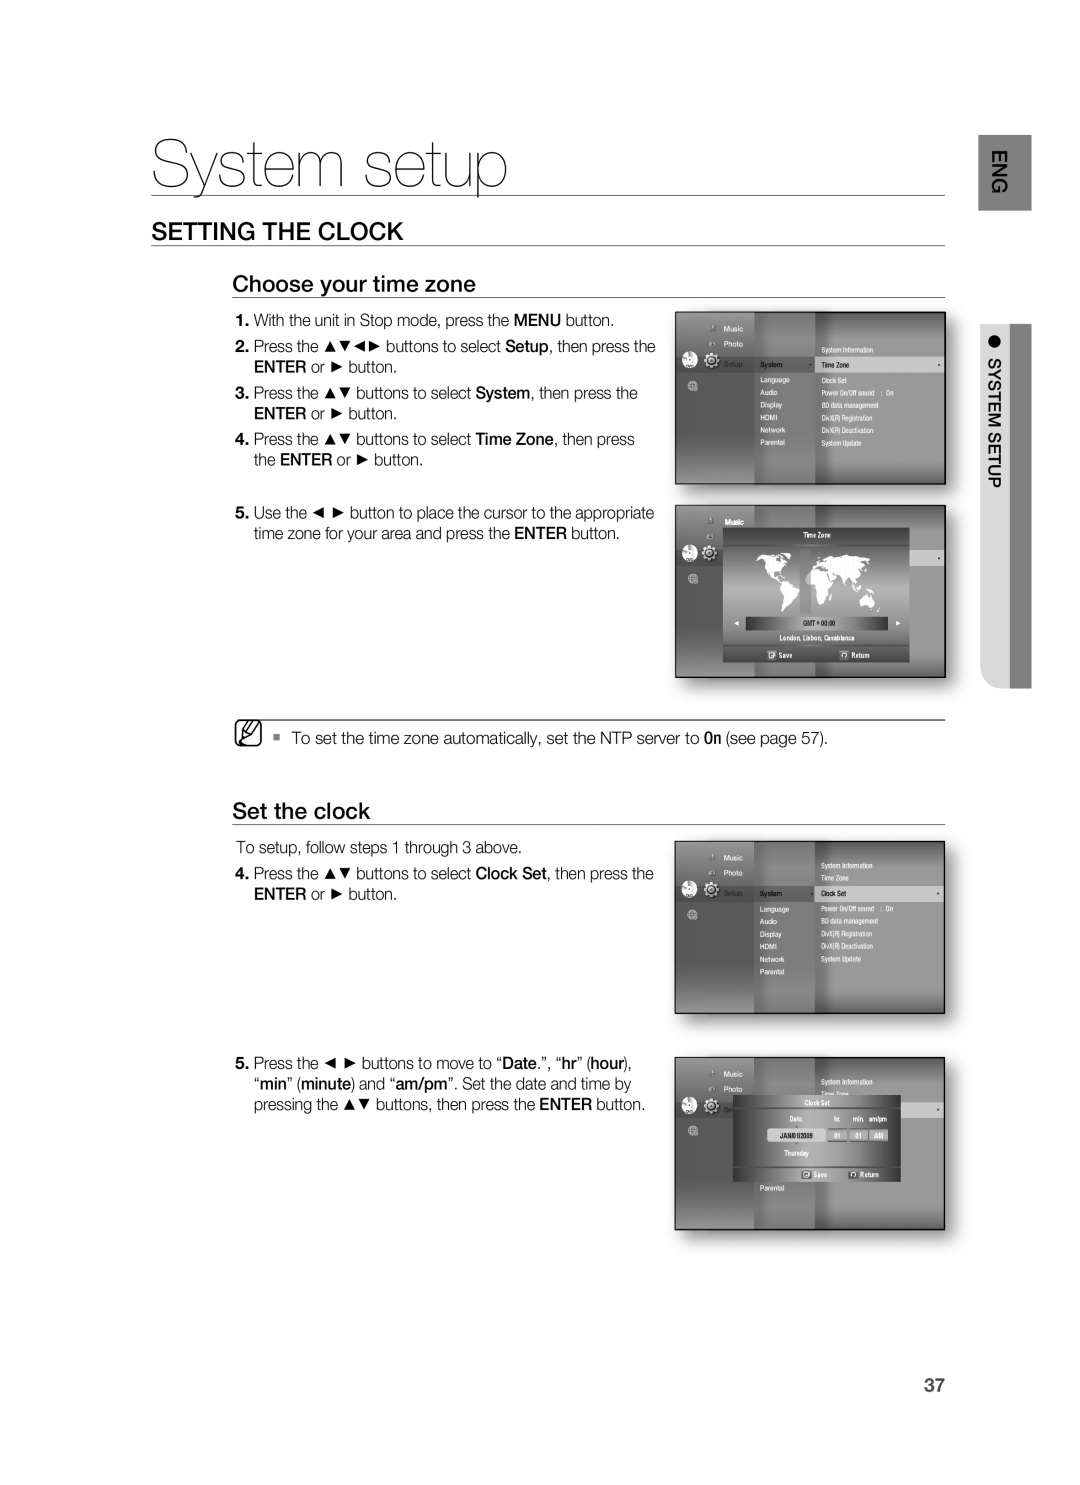 Samsung HT-BD3252A, AH68-02231A System setup, Setting The Clock, Choose your time zone, Set the clock, ENTER or button 